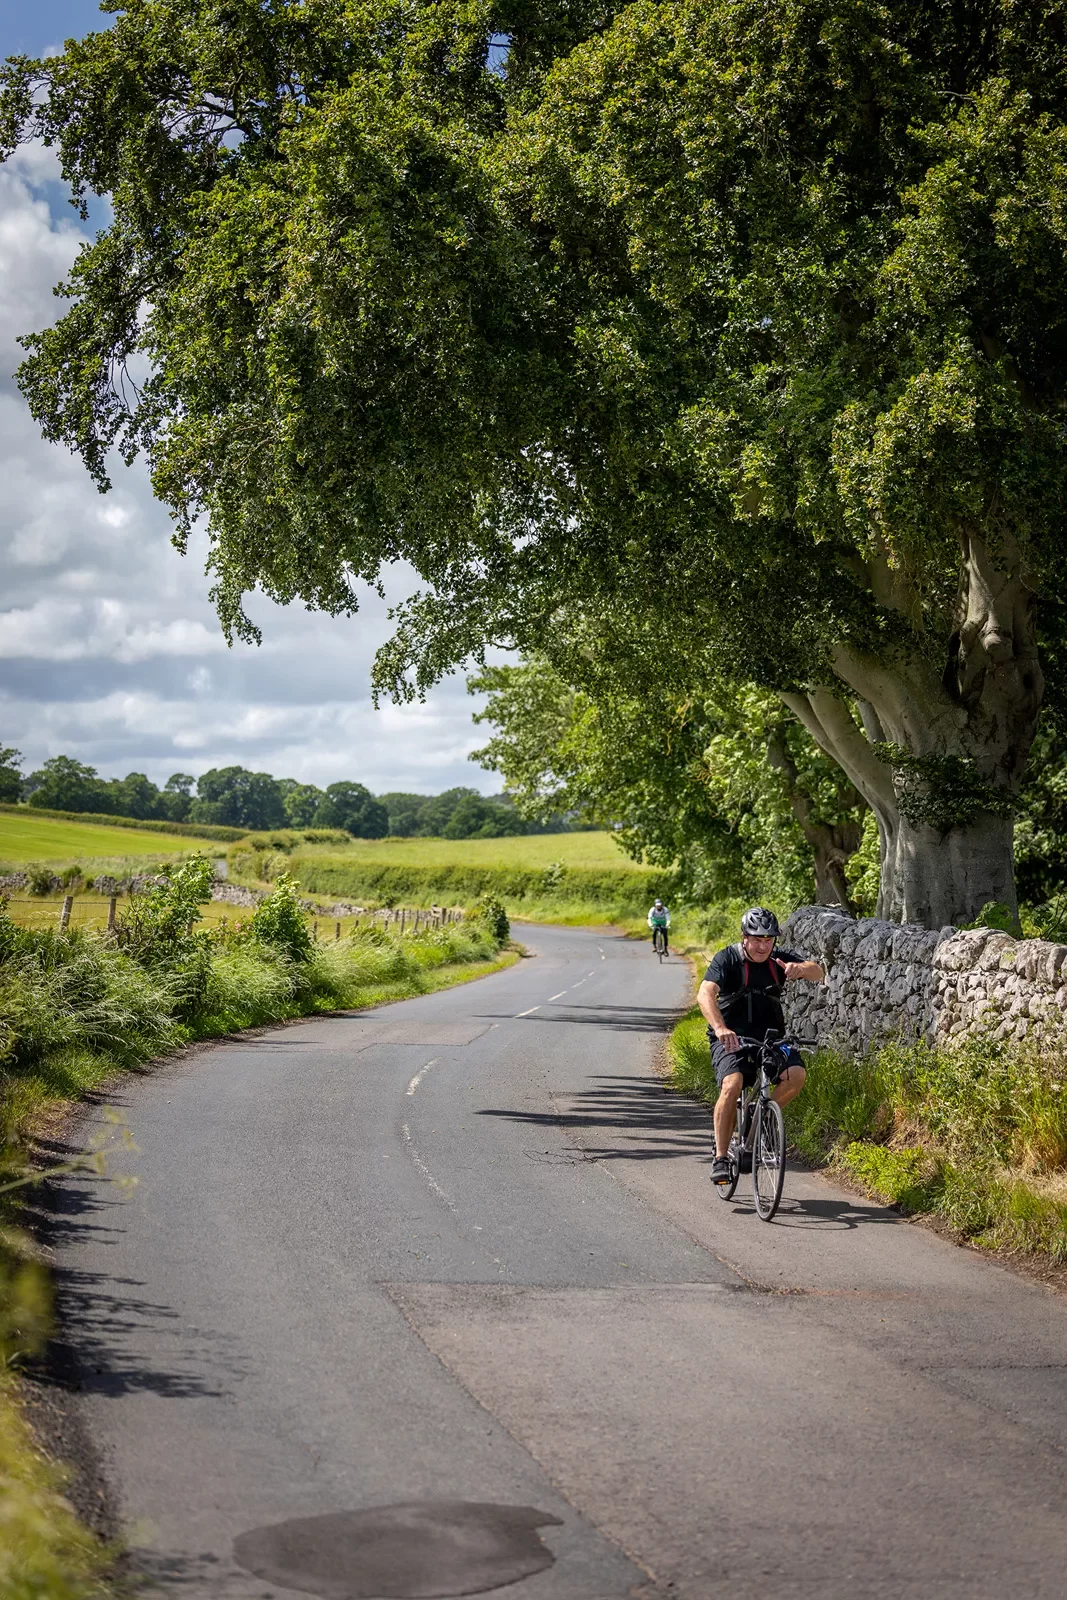 Guests cycling down road, stone wall, large tree to their left.